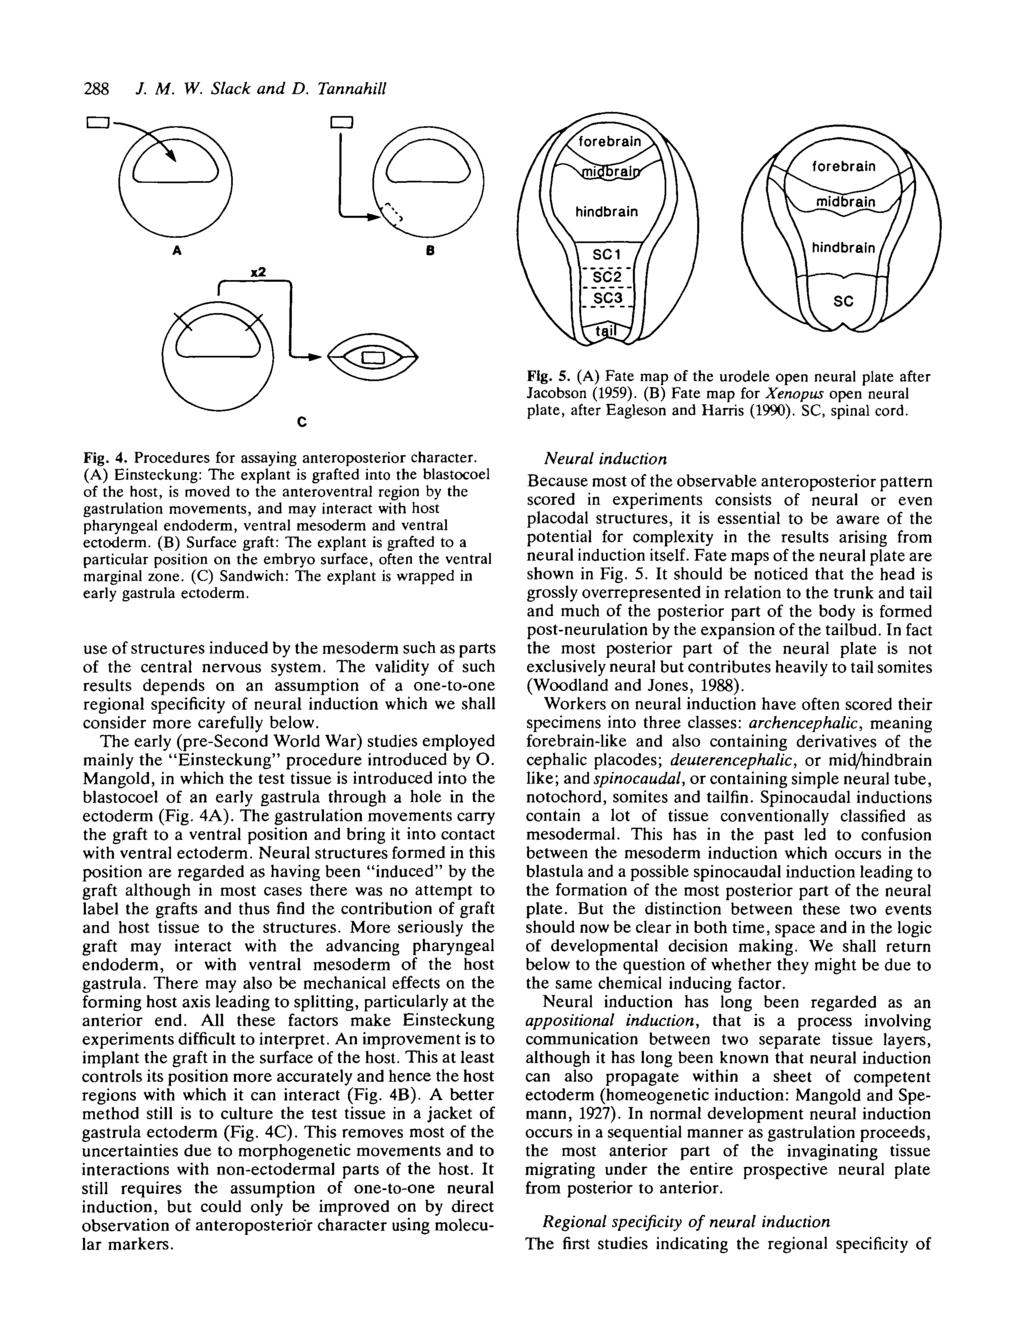 288 /. M. W. Slack and D. Tannahill CD. _ CD Fig. 5. (A) Fate map of the urodele open neural plate after Jacobson (1959). (B) Fate map for Xenopus open neural plate, after Eagleson and Harris (1990).